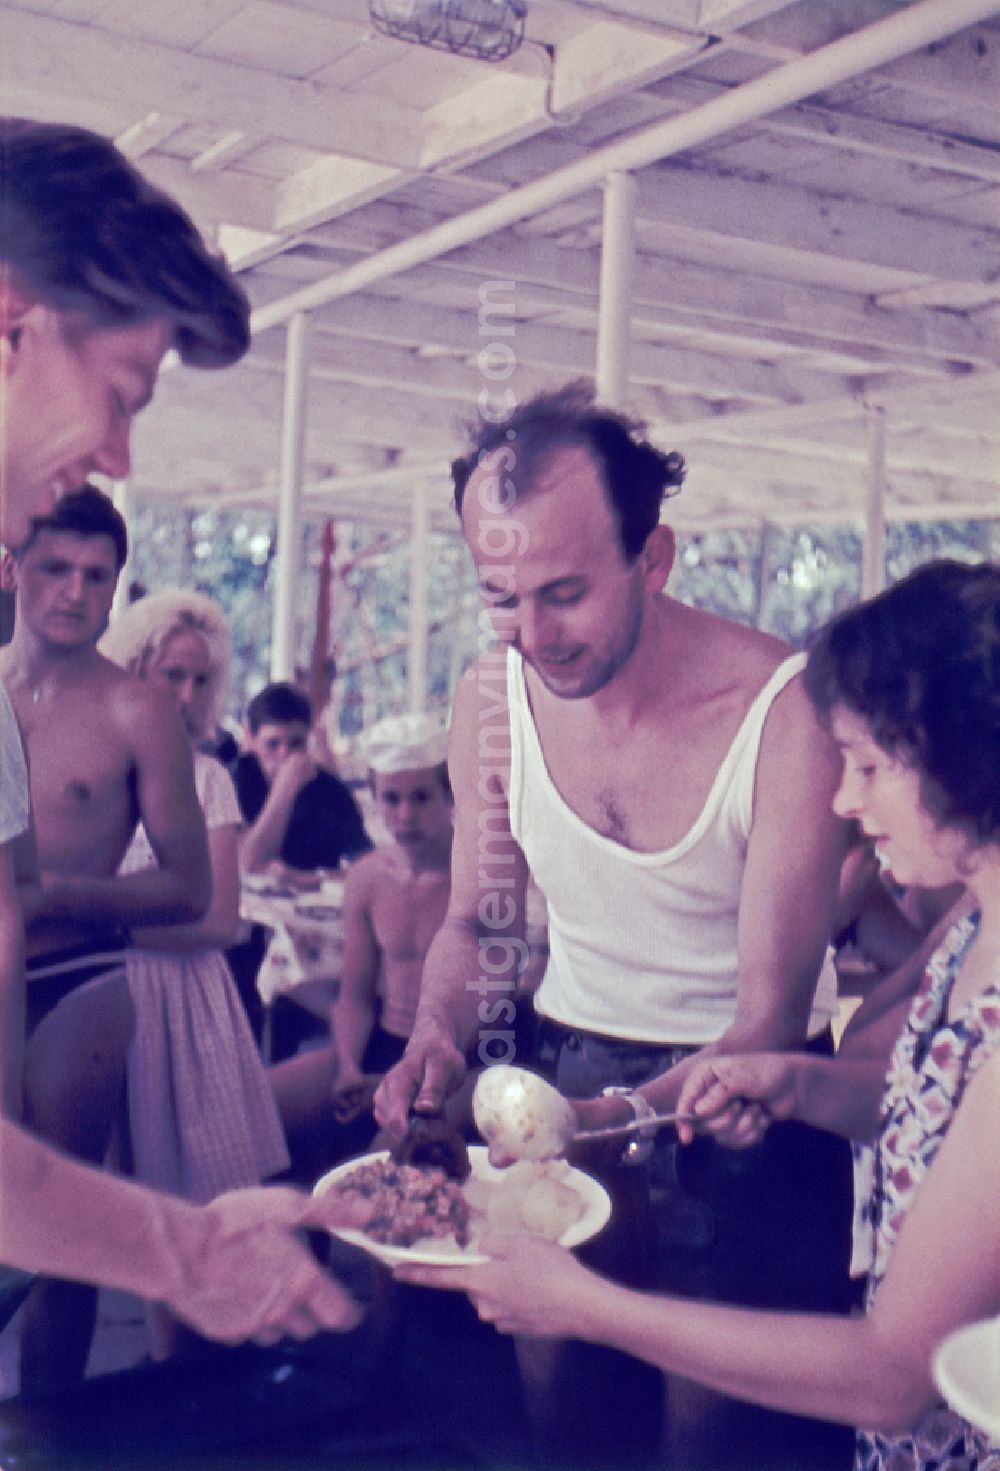 GDR photo archive: Menz - Summer camp operation with pupils and teenagers at lunch - food distribution in Menz, Brandenburg on the territory of the former GDR, German Democratic Republic